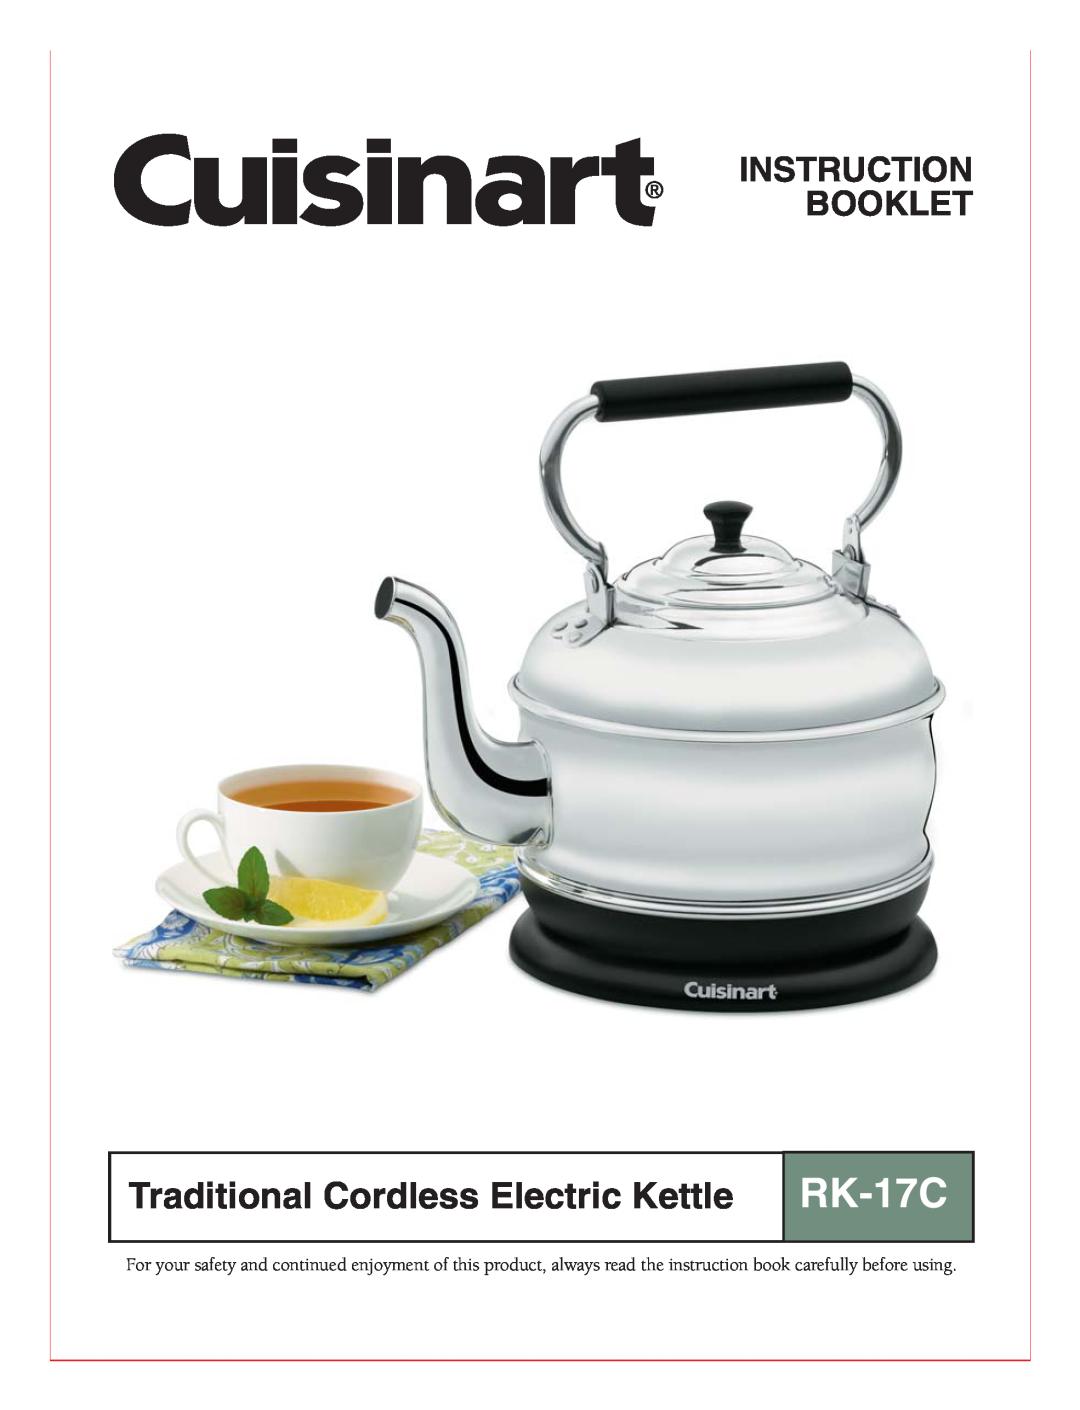 Cuisinart RK-17C manual Instruction Booklet, Traditional Cordless Electric Kettle 